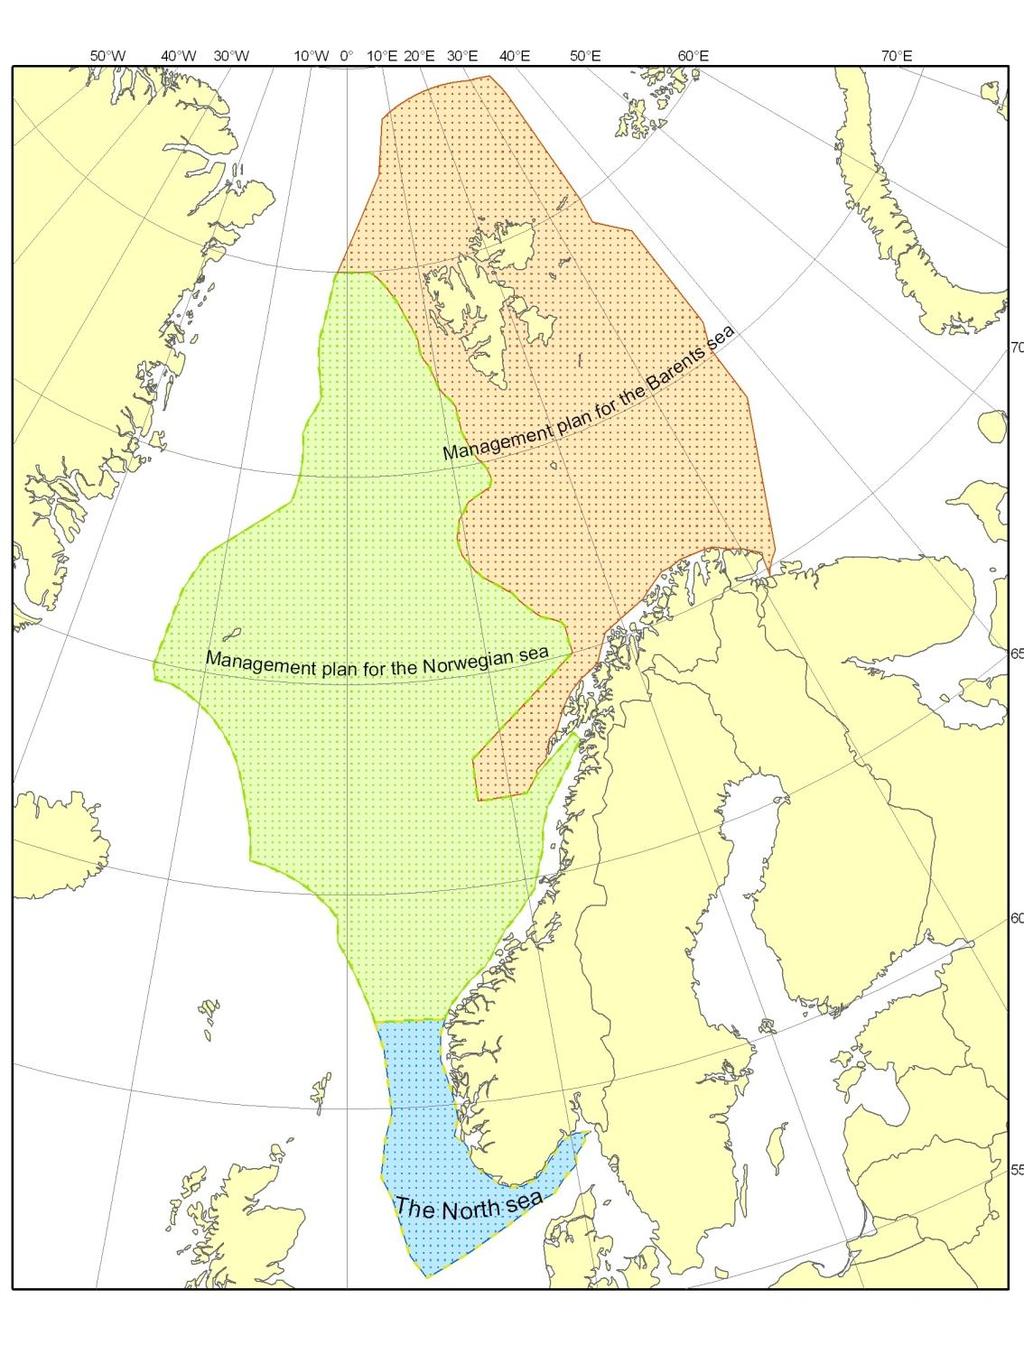 The Norwegian Management plans Initiated in 2001 to implement integrated and ecosystem-based management for Nor.